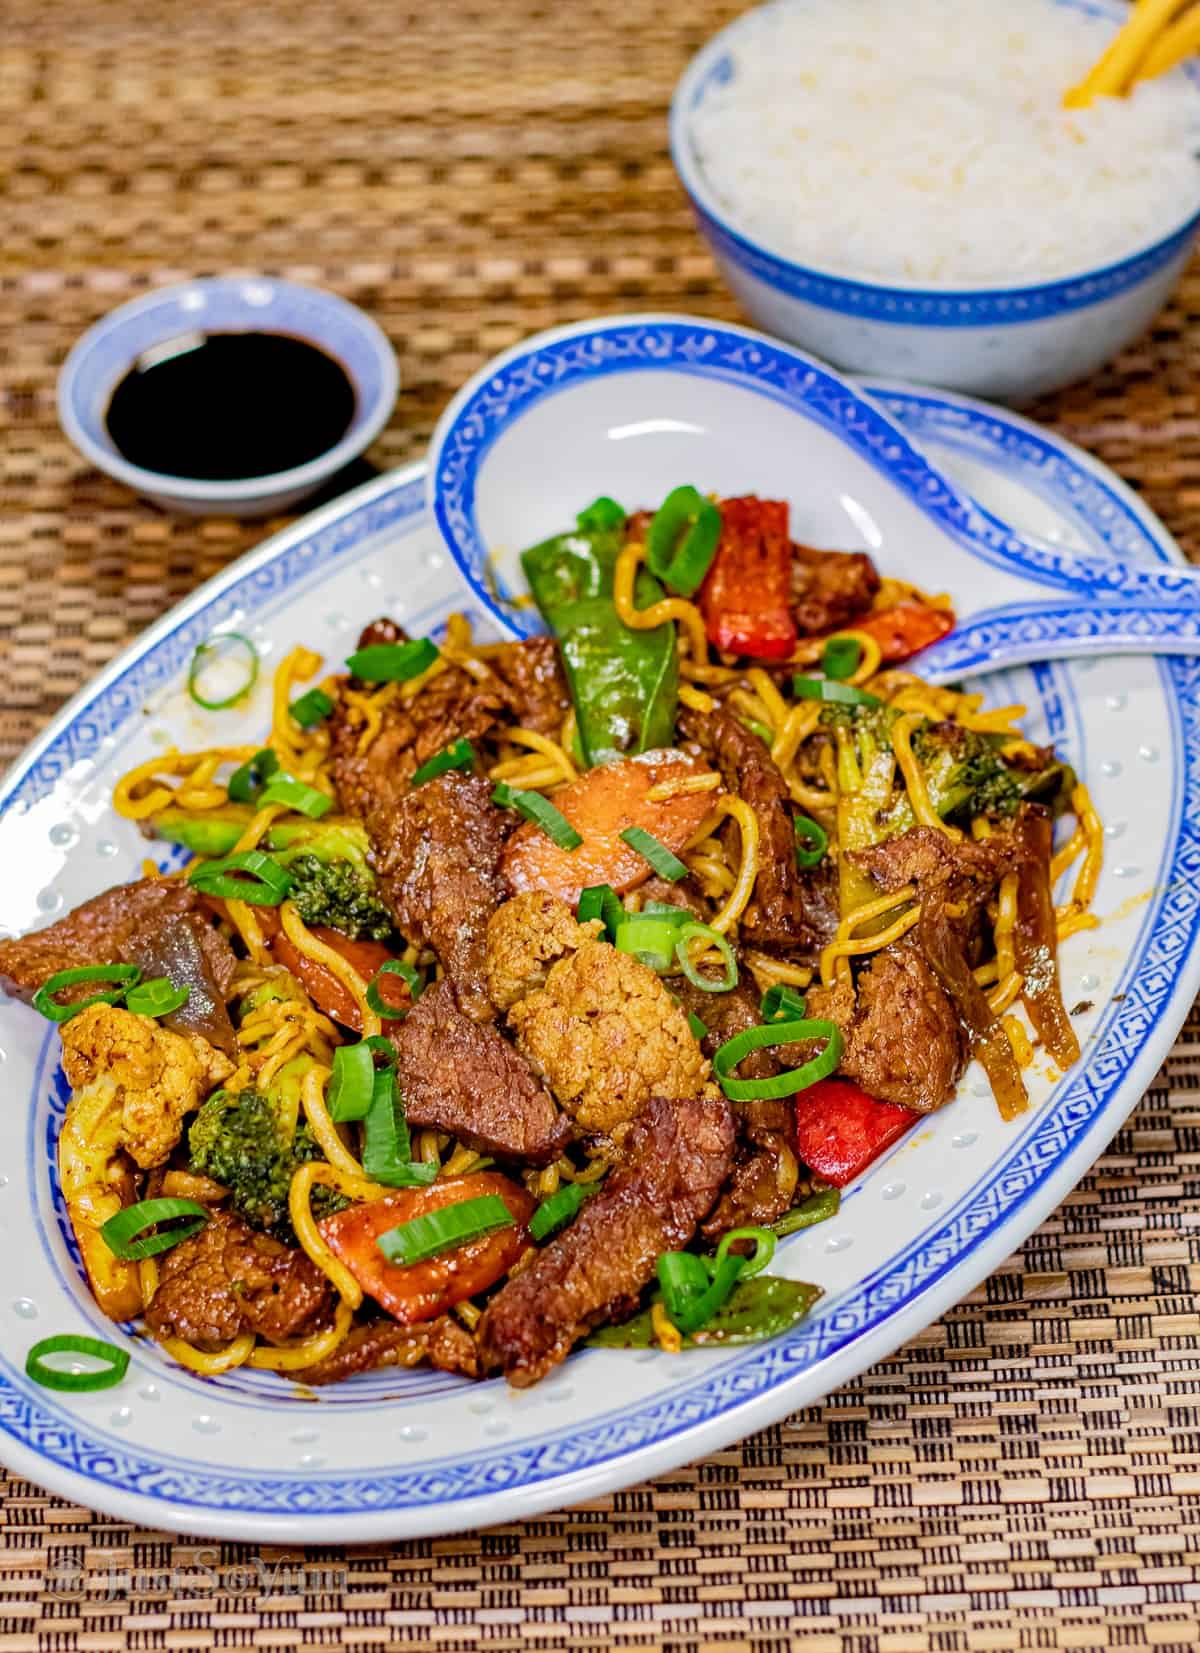 Beef in Black Bean Sauce with Noodles